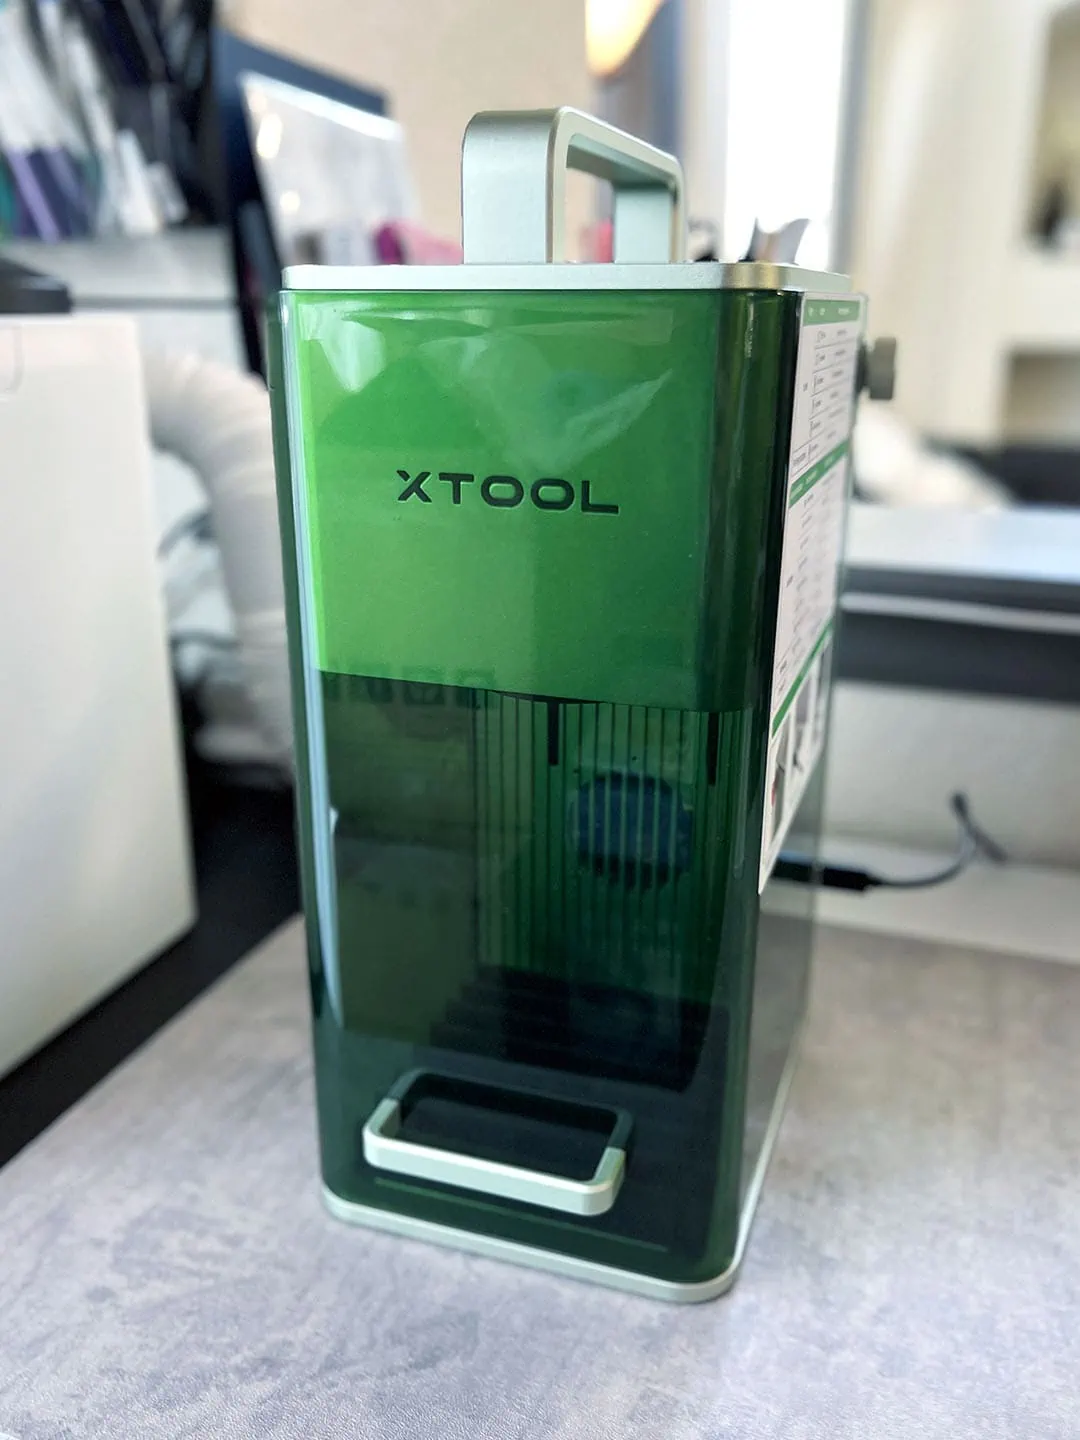 xTool F1 Portable Laser Engraver Full Review: Must-Read Tutorials